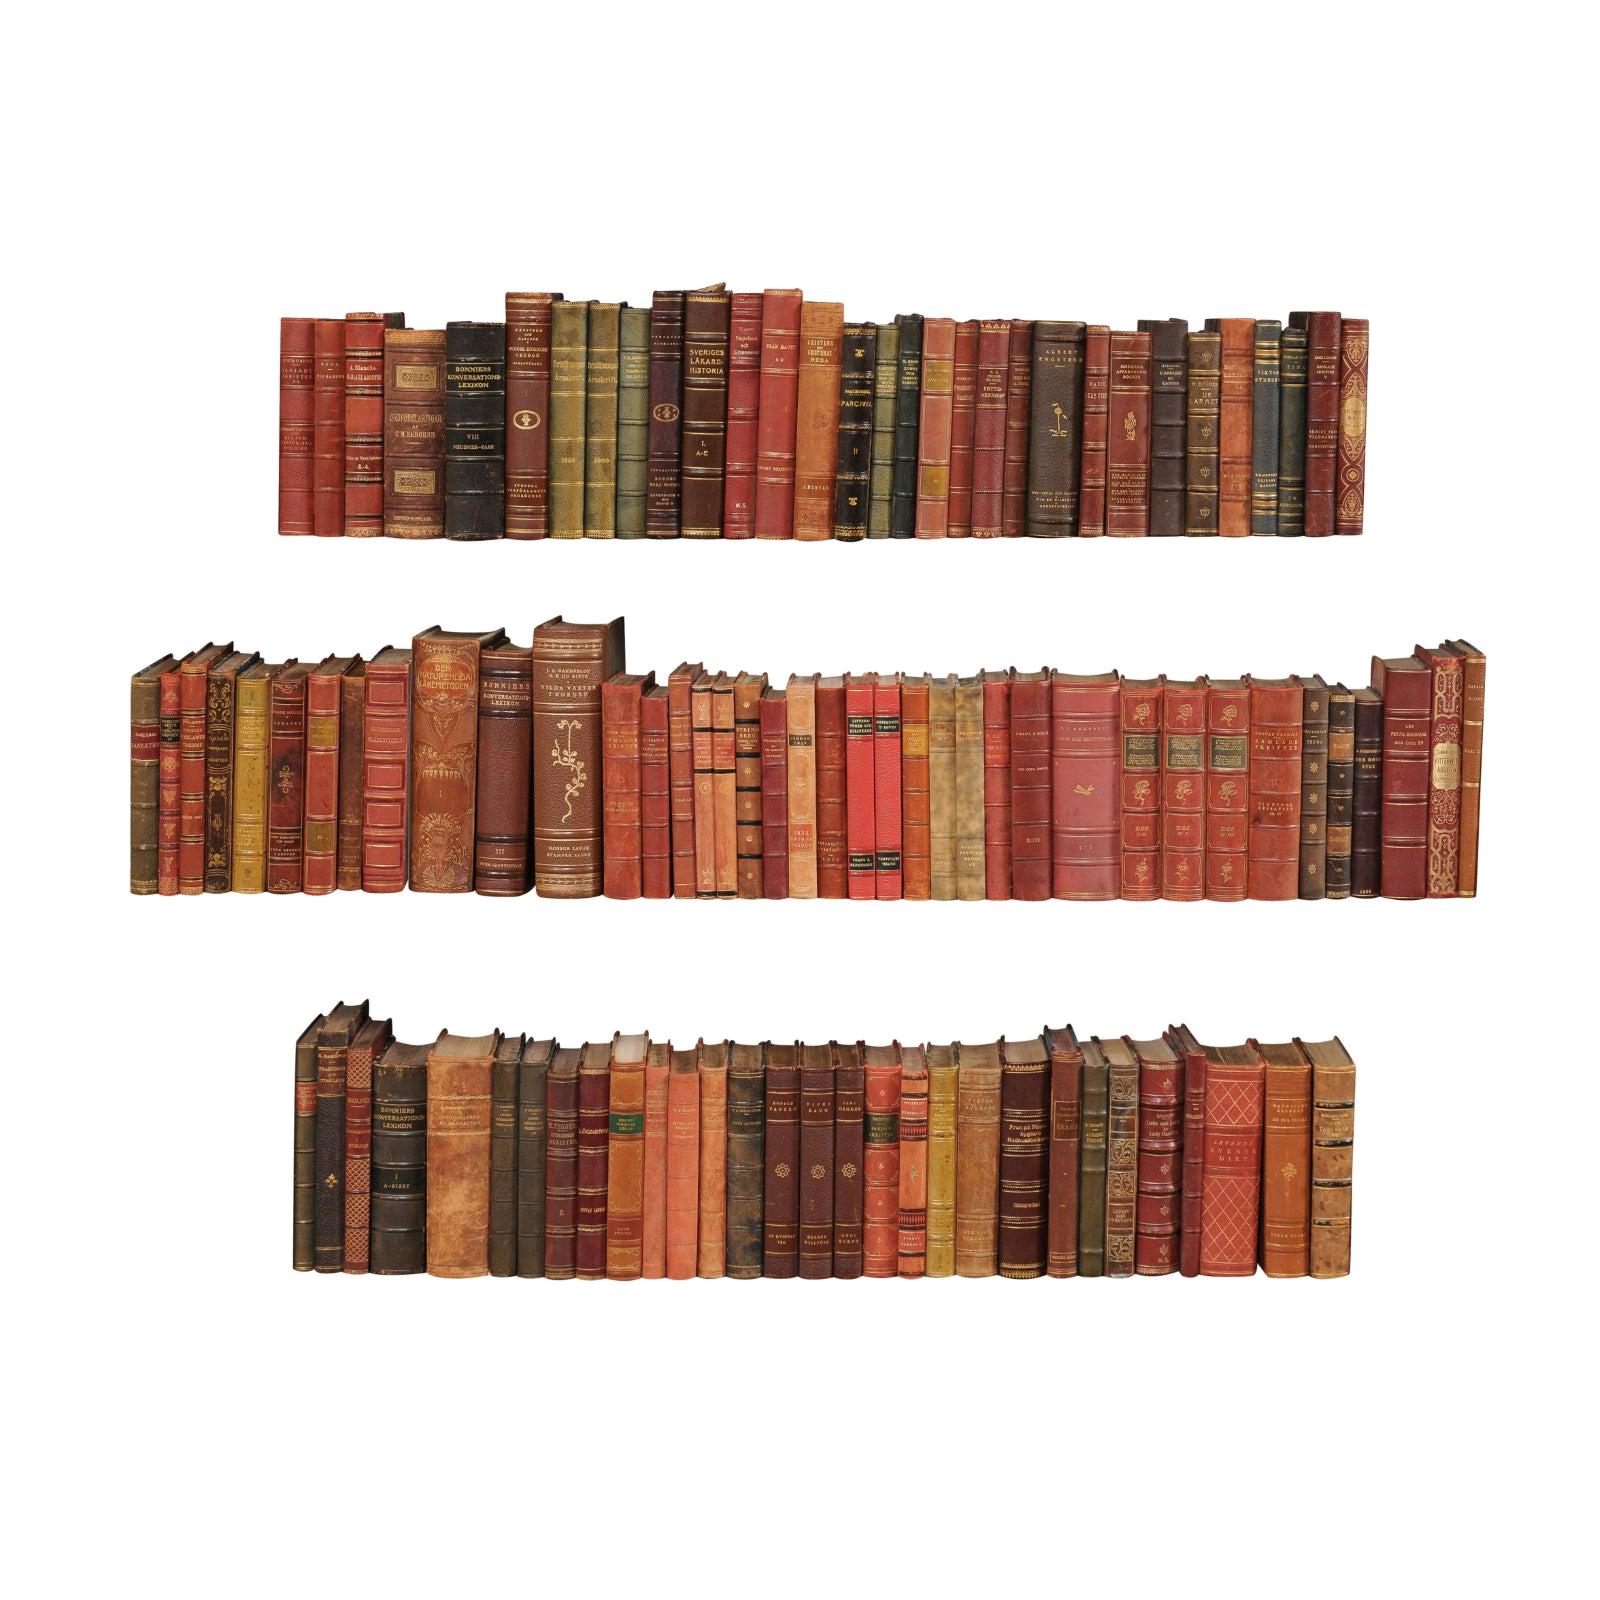 10 Ft. Run of 100 Swedish Antique Leather-Bound Books, in Varying Warm Tones